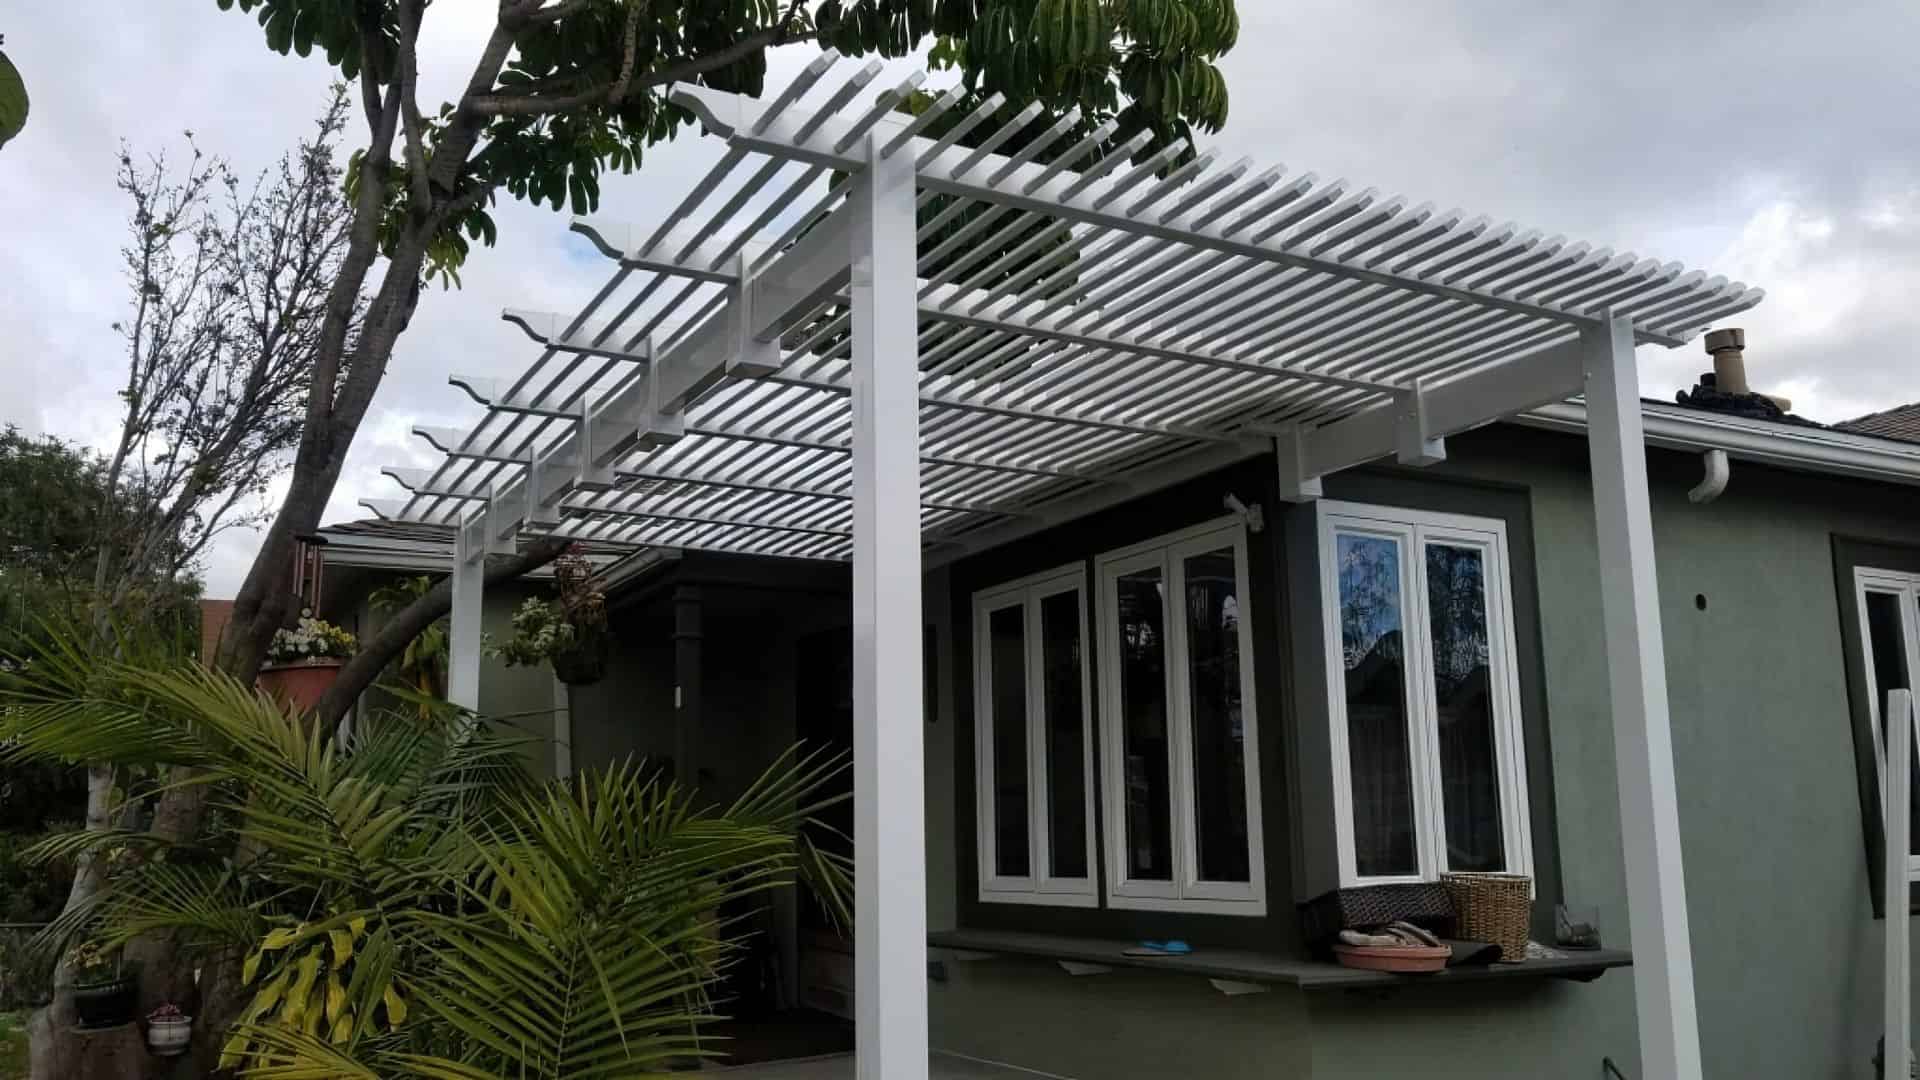 Vinyl louvered patio cover over small garden with potted plants and various small flowers leading to the grassy backyard